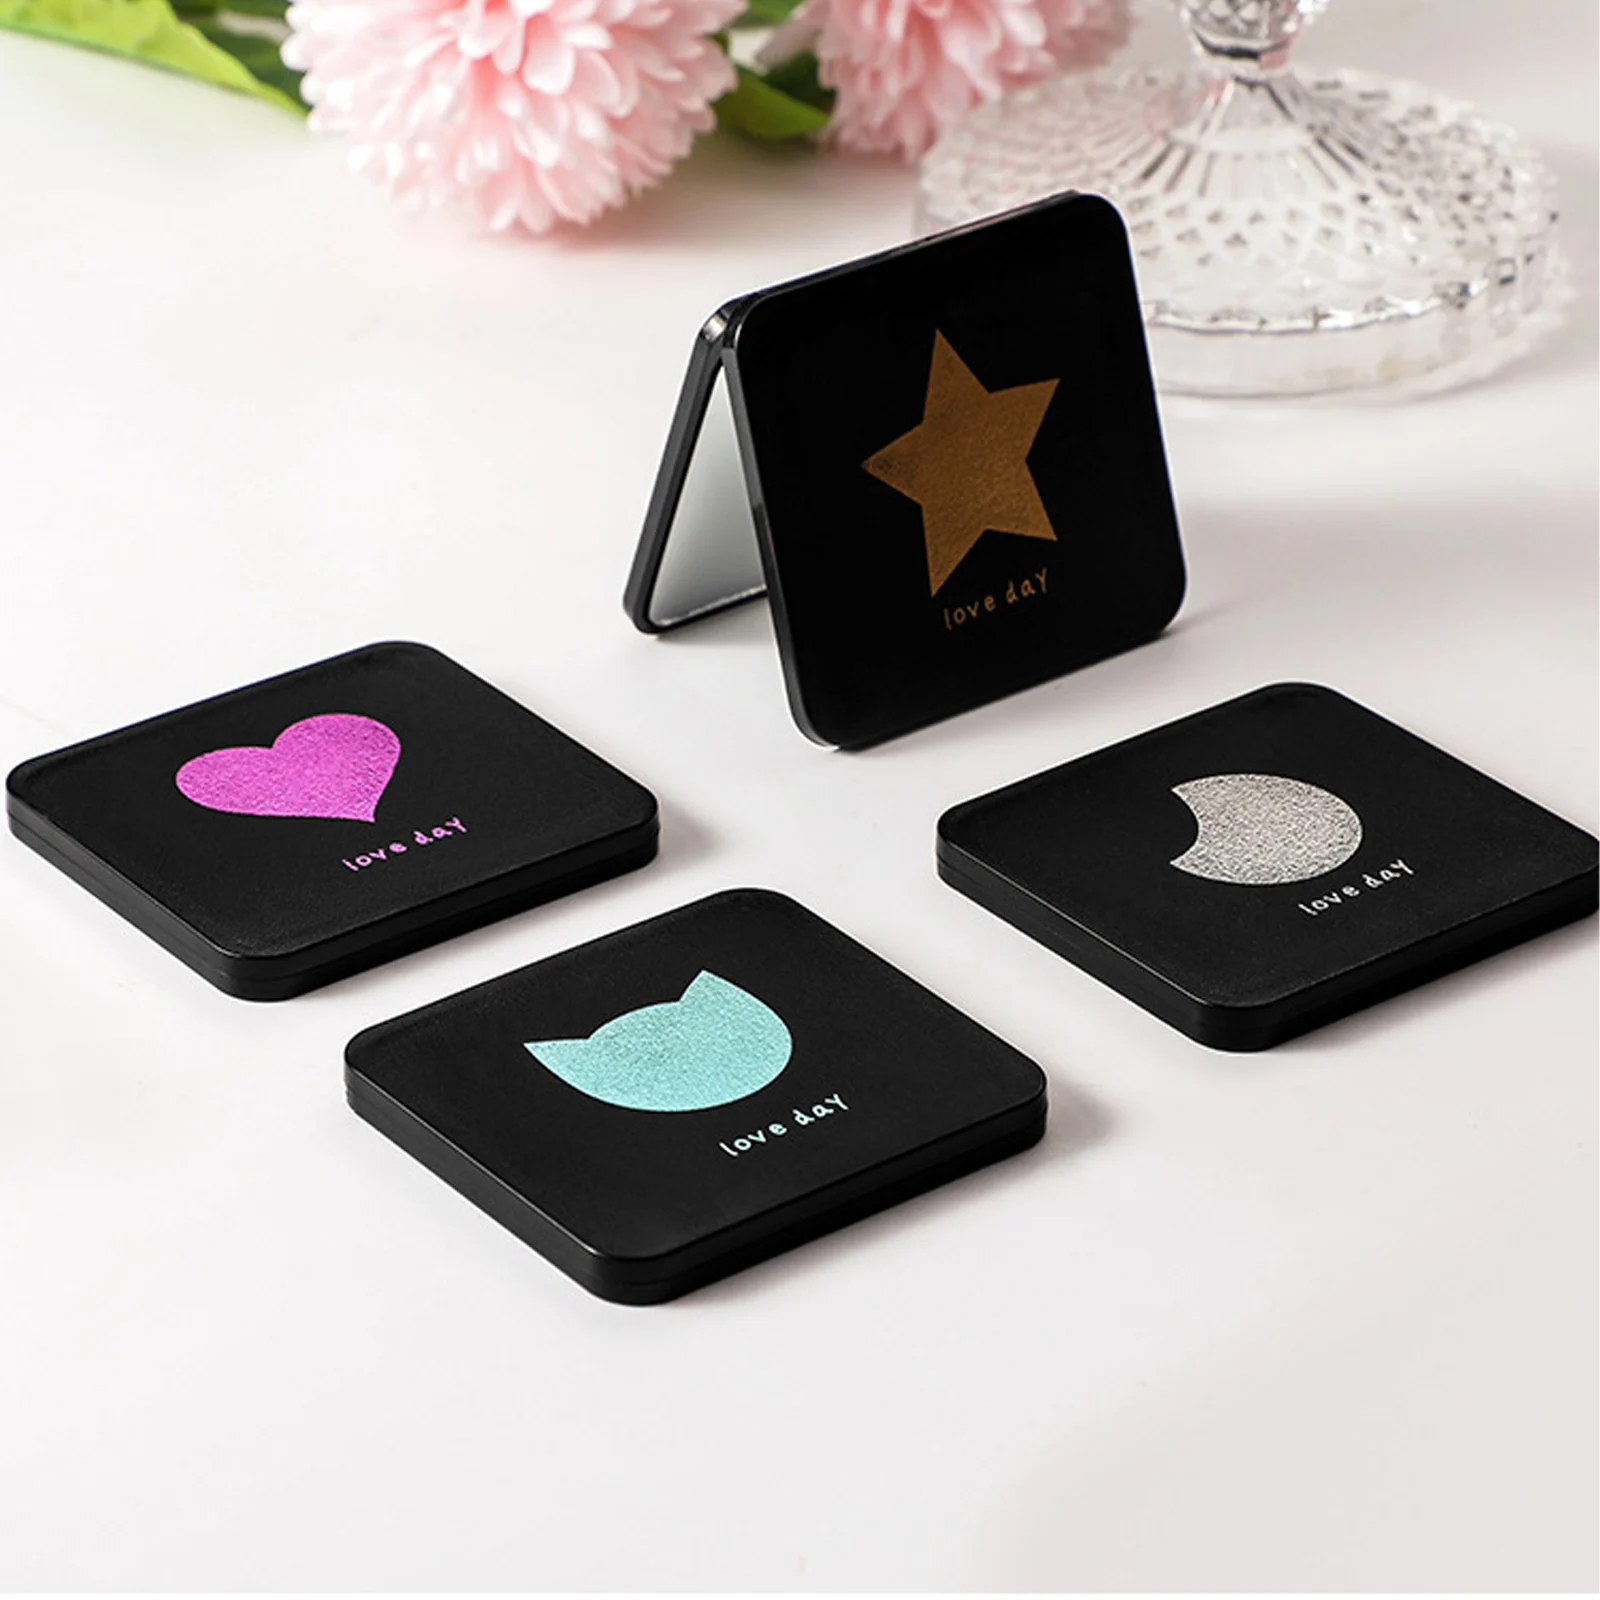 Mini Double Sided Makeup Mirror Folding Compact Mirror Female Portable Travel Square Handheld Pocket Mirror Makeup Accessories casual cropped double sided cashmere water ripple coat women autumn winter wool high end tweed lace up wool female outerwear